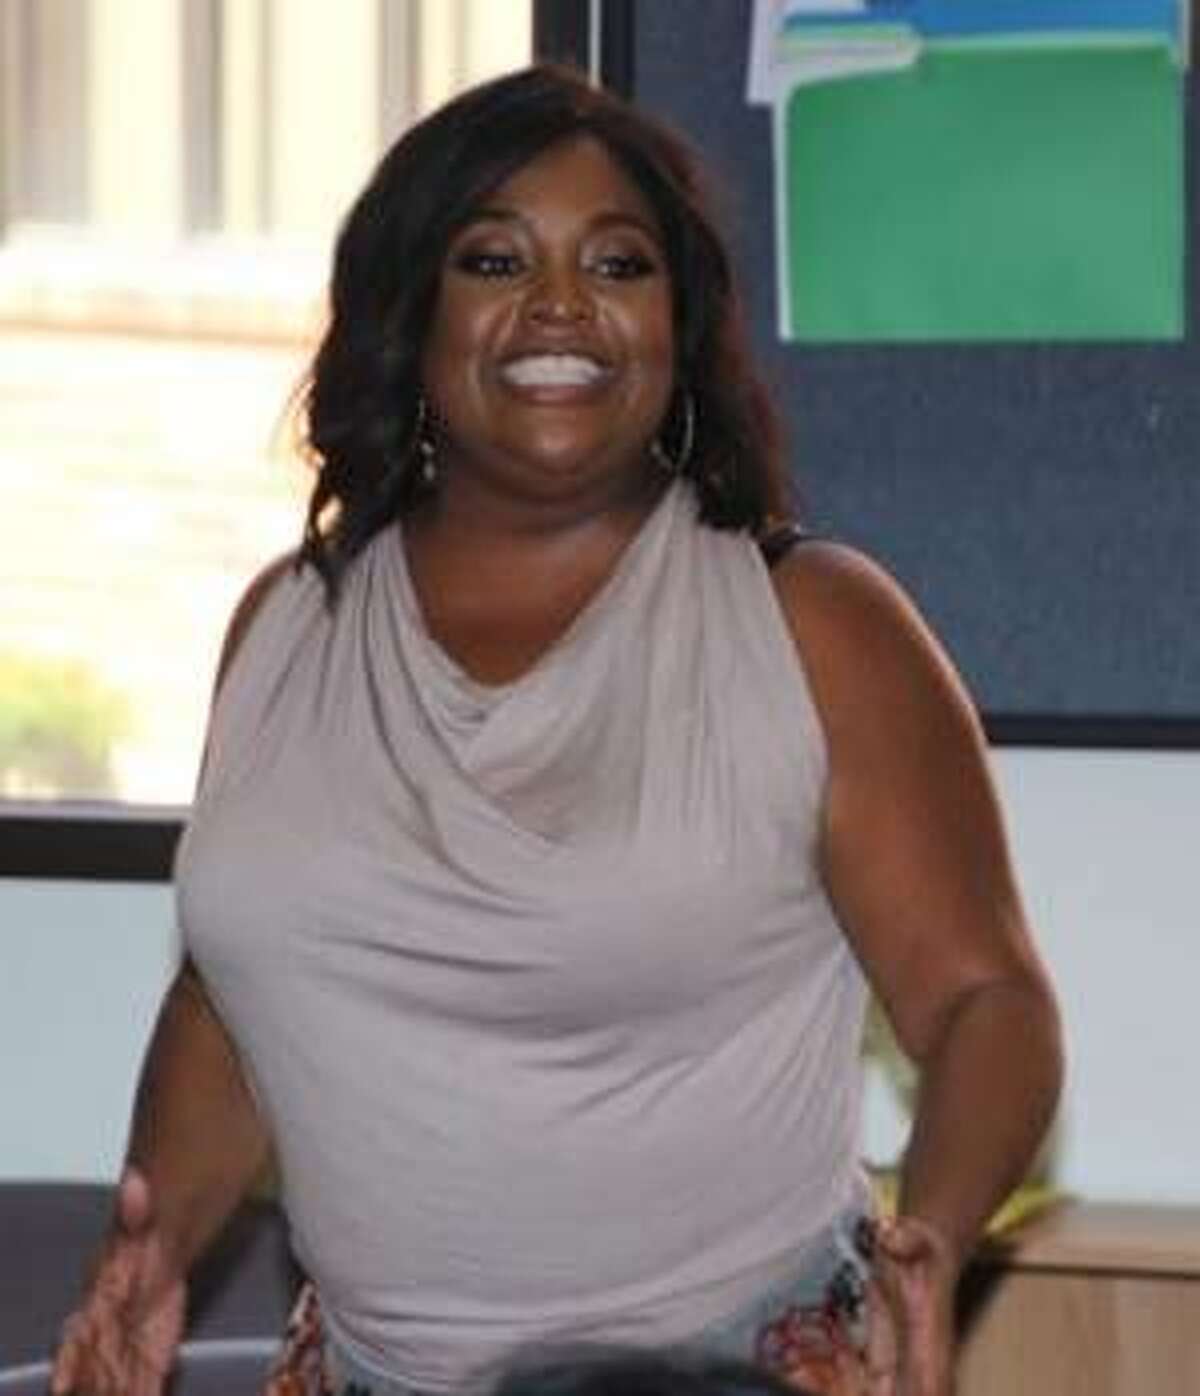 Actress, comedian and television personality Sherri Shepherd visited the SIUE East St. Louis Charter High School (CHS) on Friday, Sept. 15.